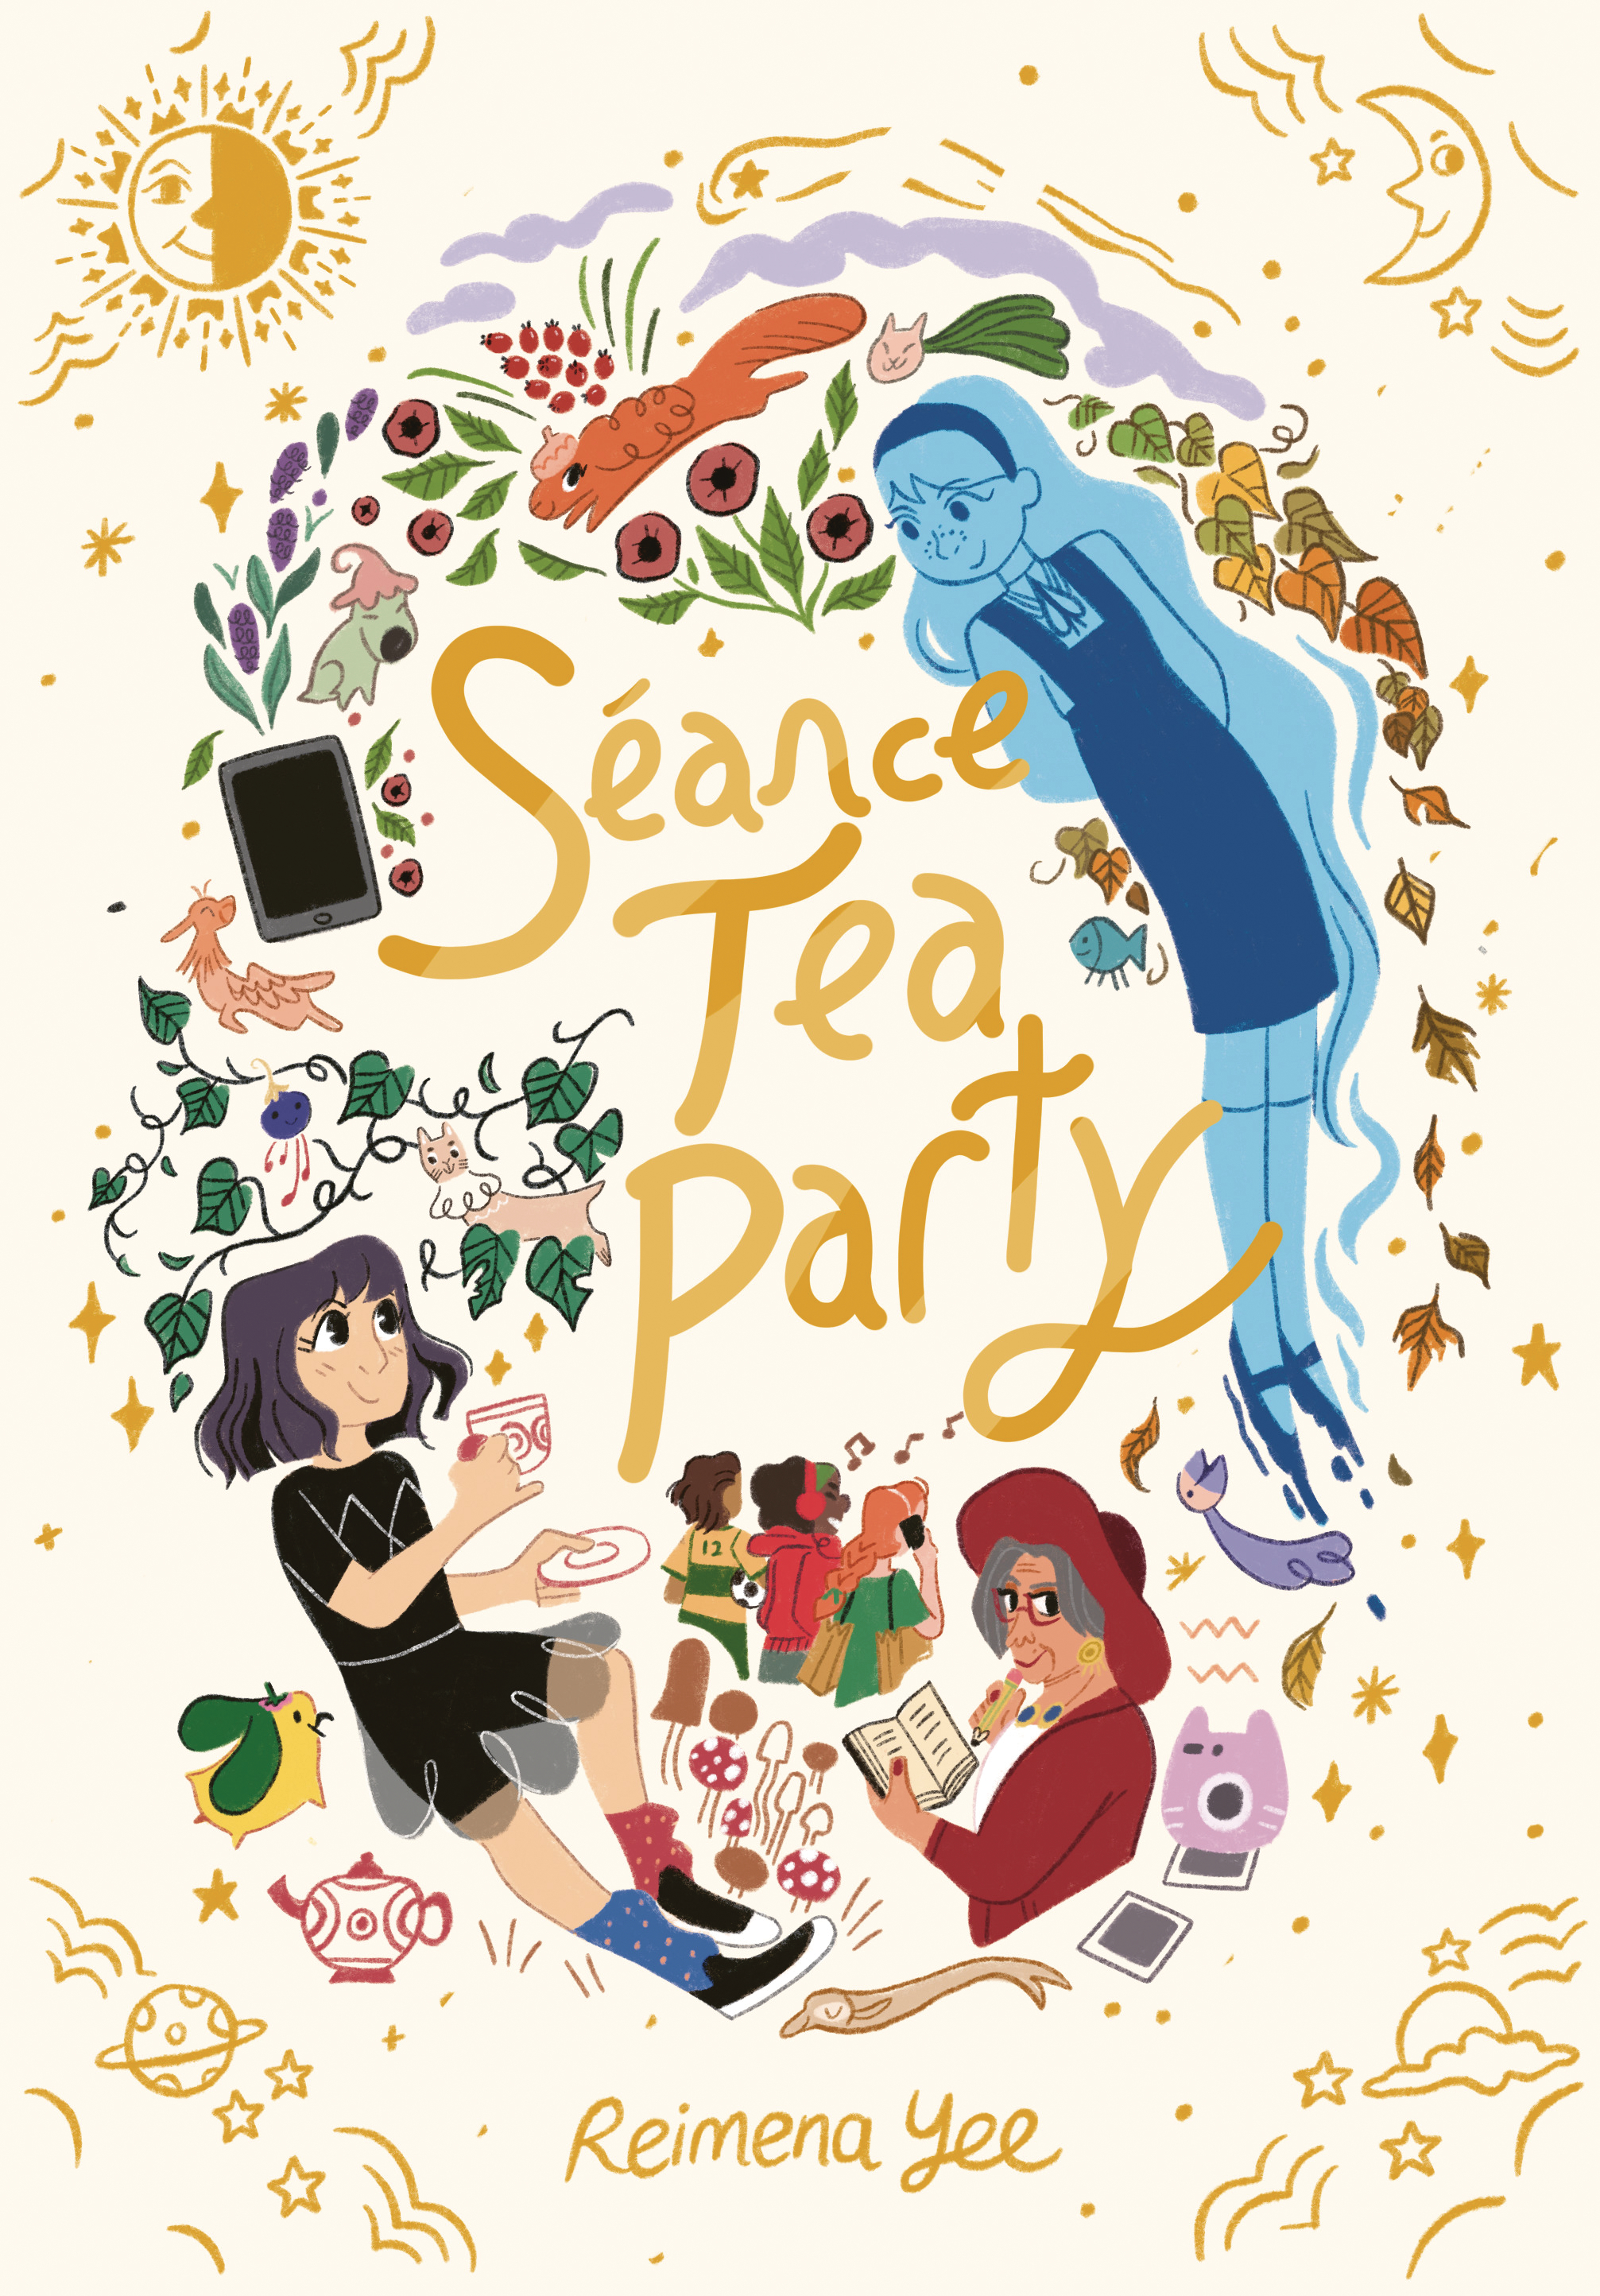 Seance Tea Party Hardcover Graphic Novel